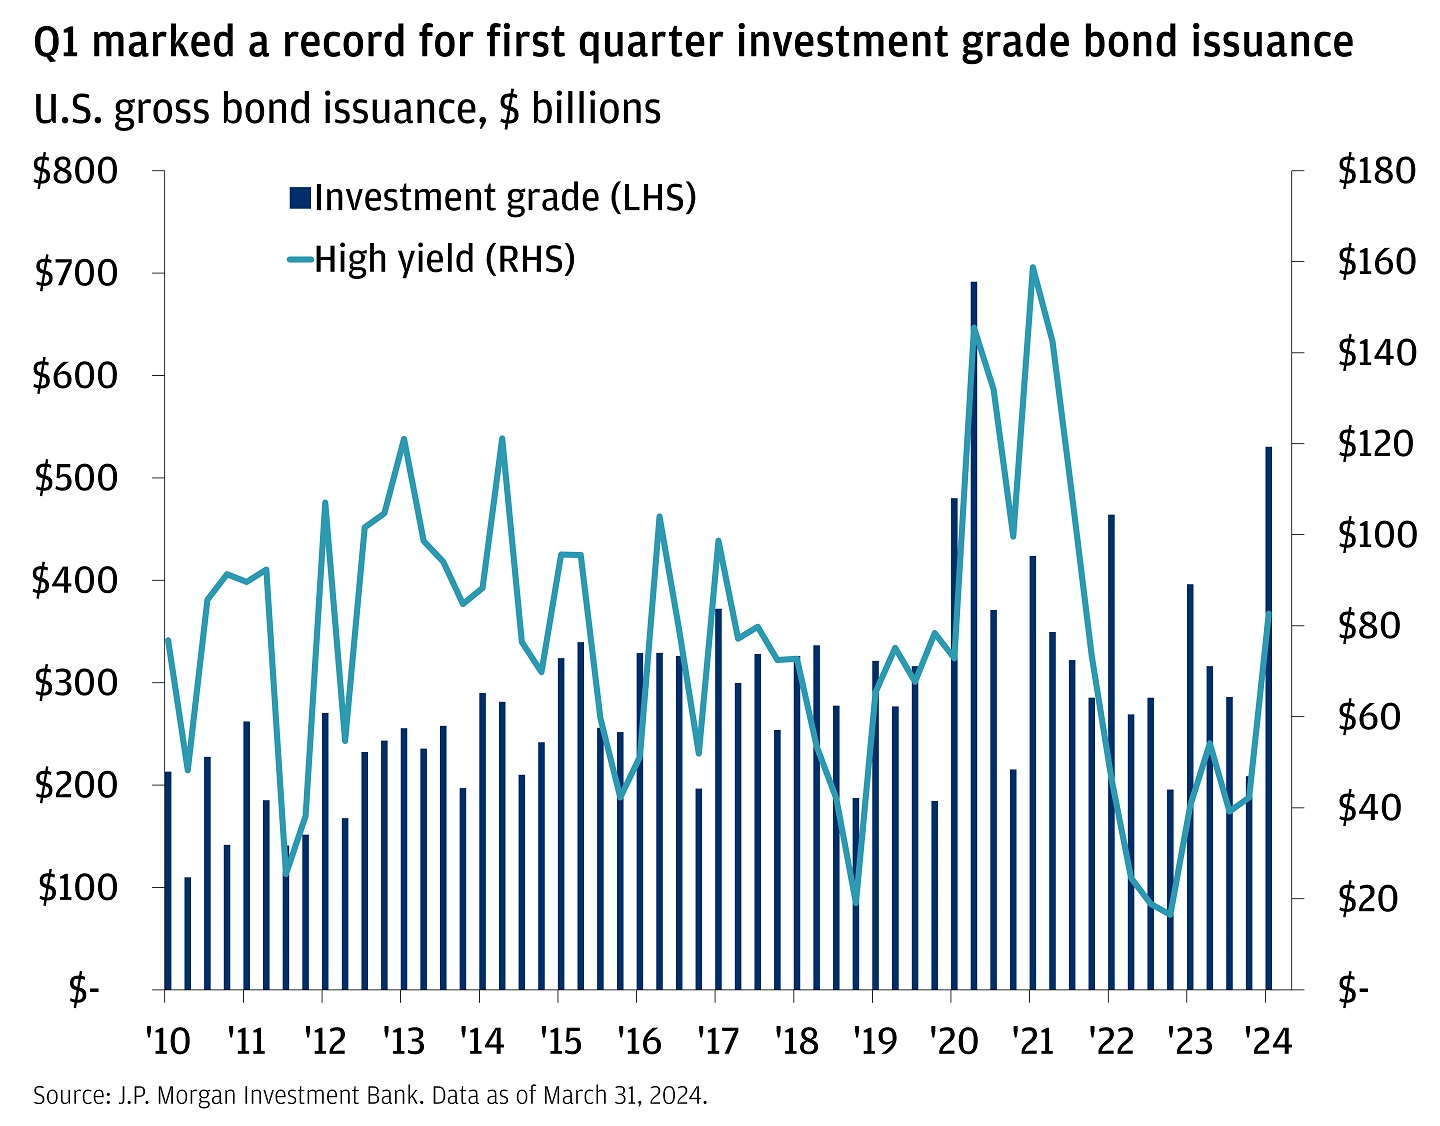 Chart showing Investment Grade and High Yield gross issuance in billions USD from 1Q 2010 to 1Q 2024.